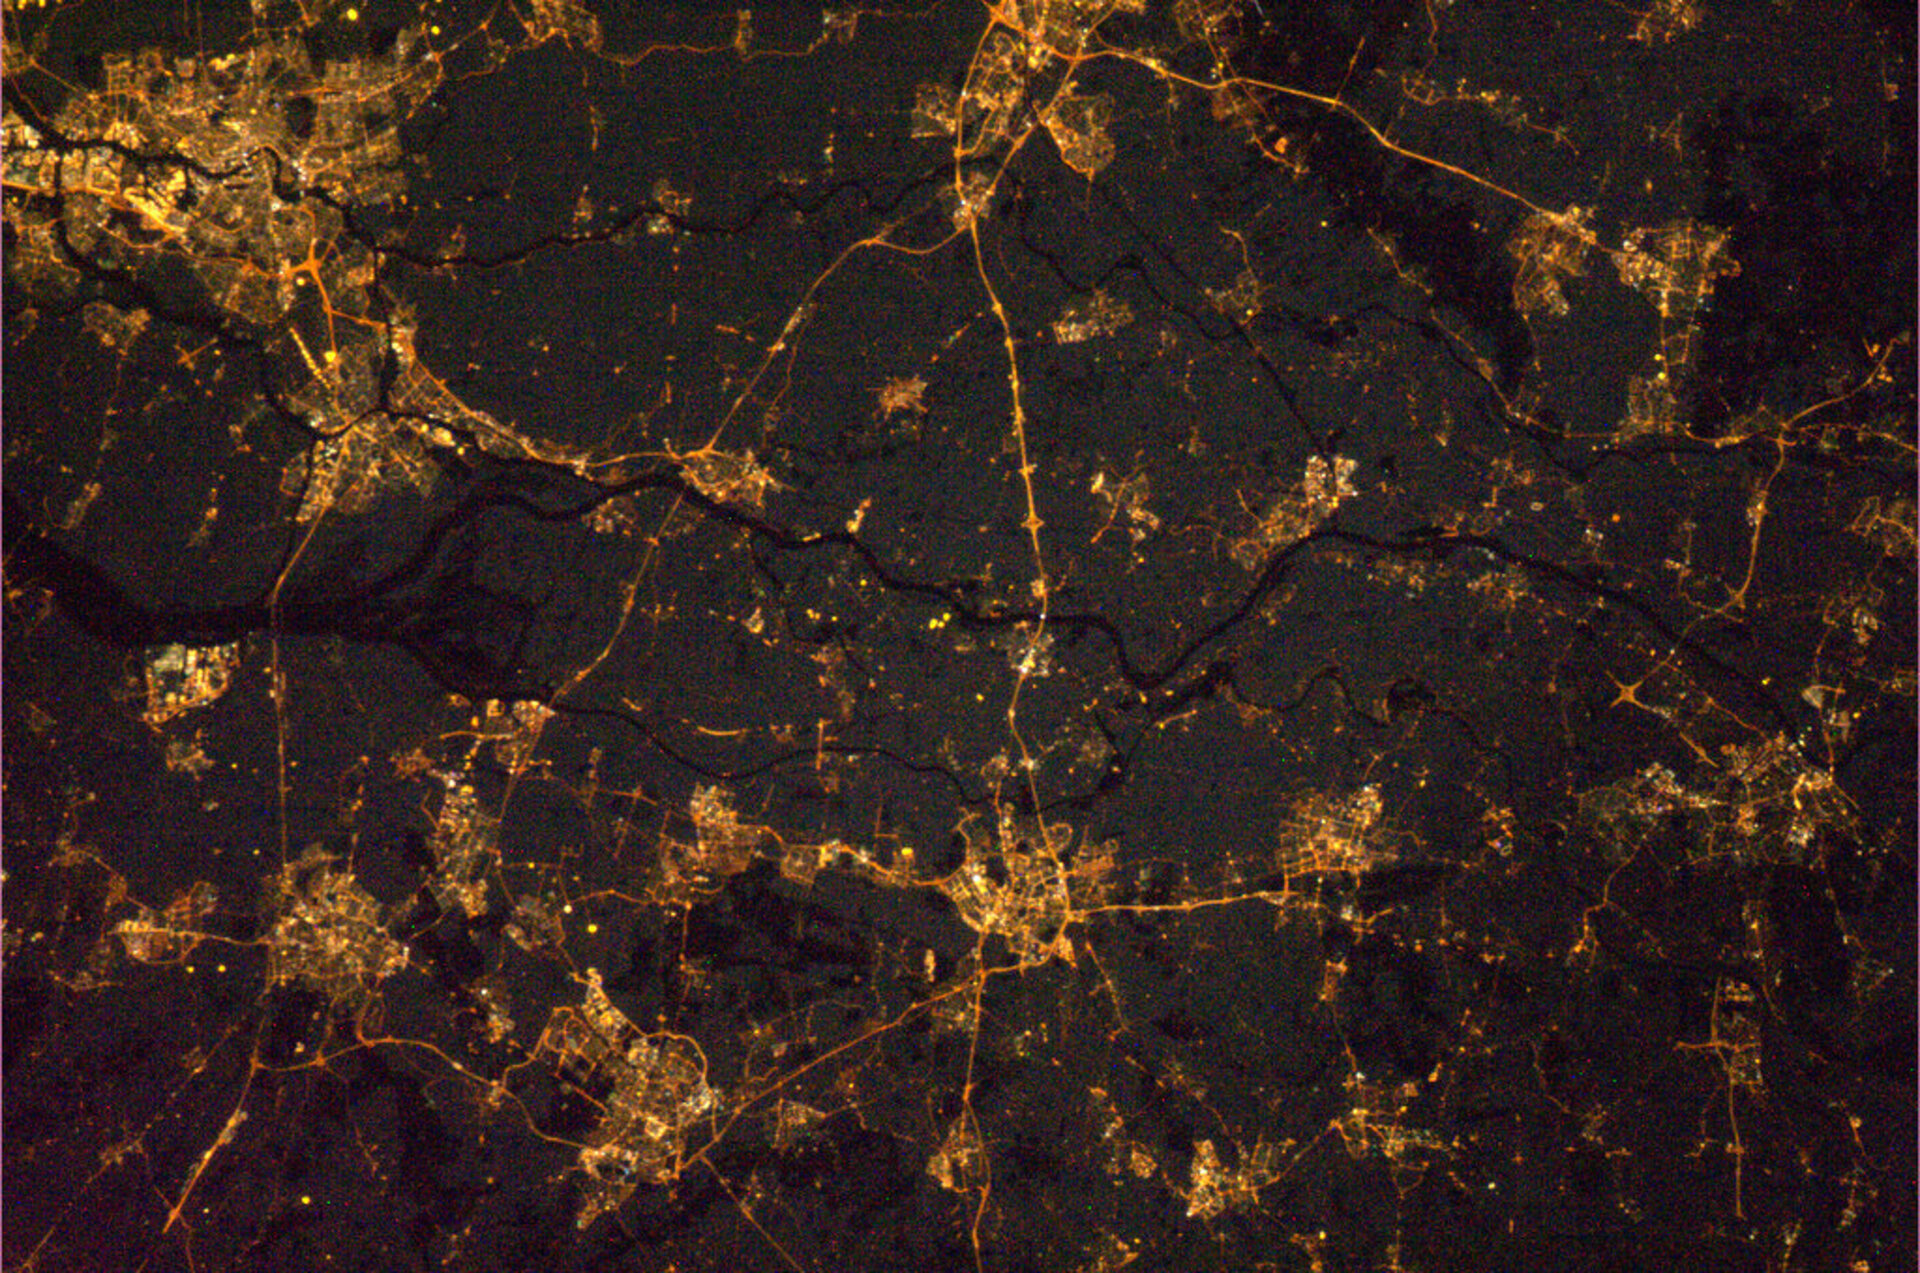 Southern Netherlands, as seen from the ISS